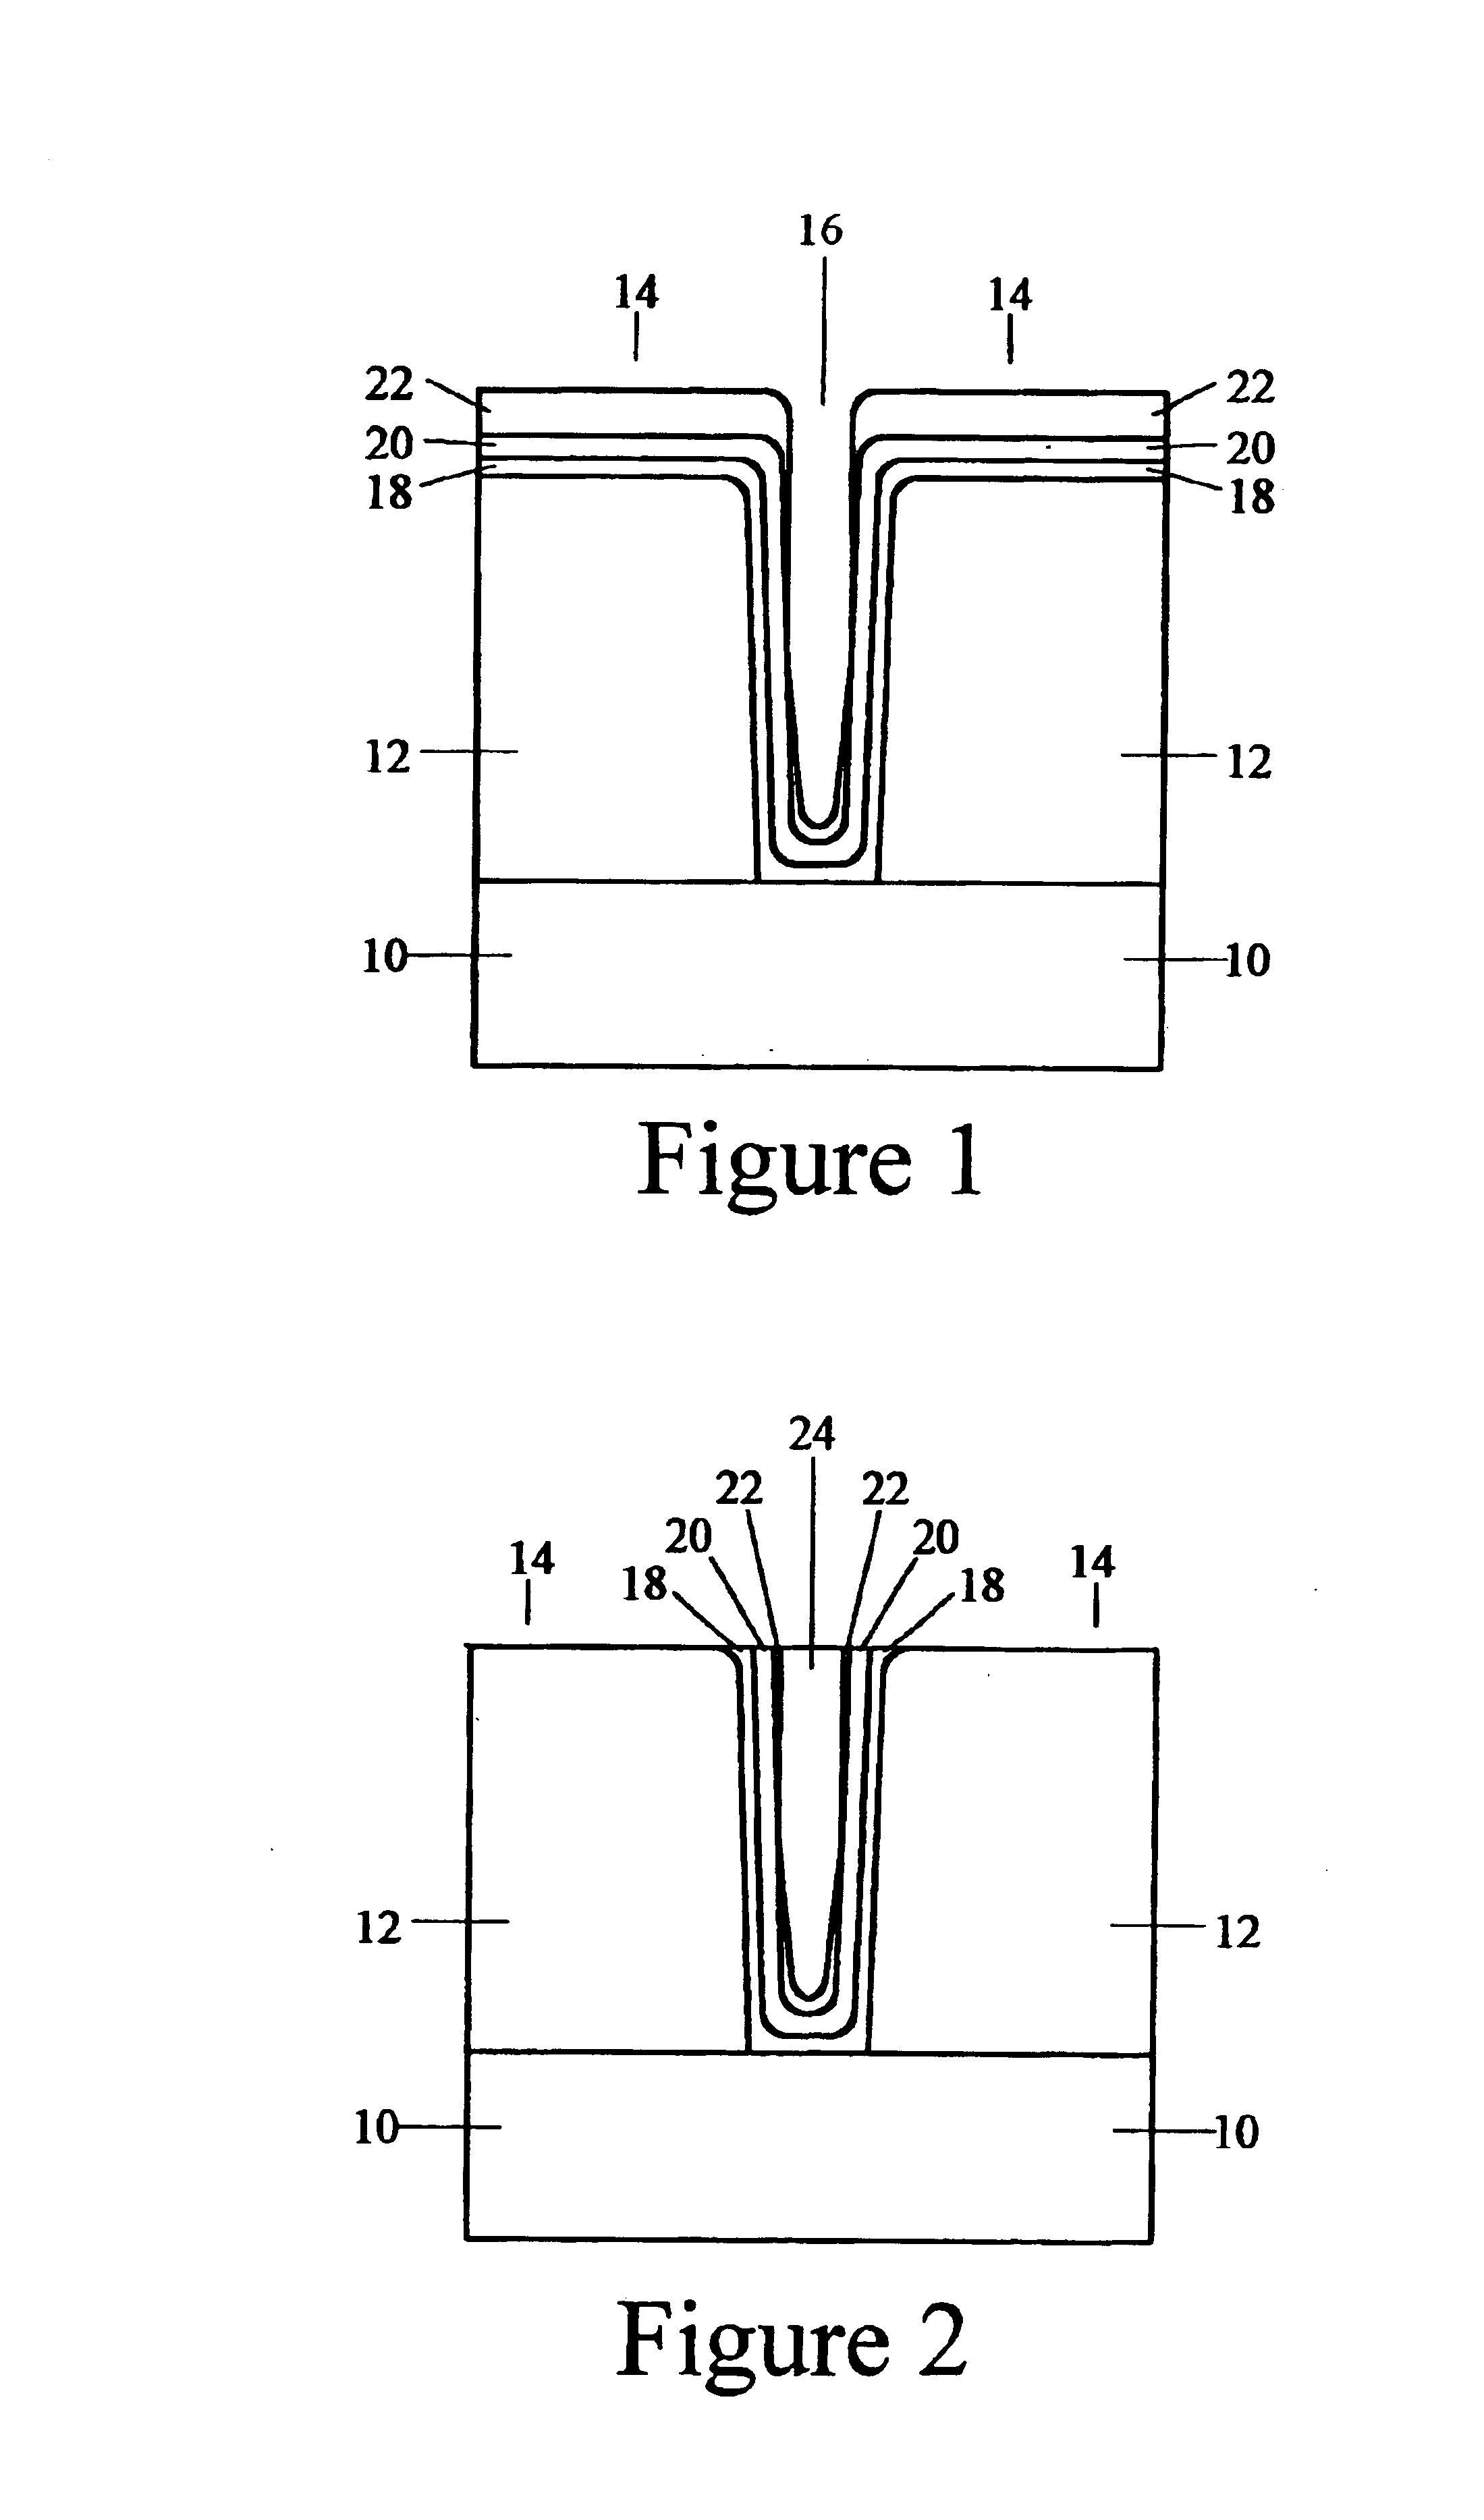 Combined conformal/non-conformal seed layers for metallic interconnects